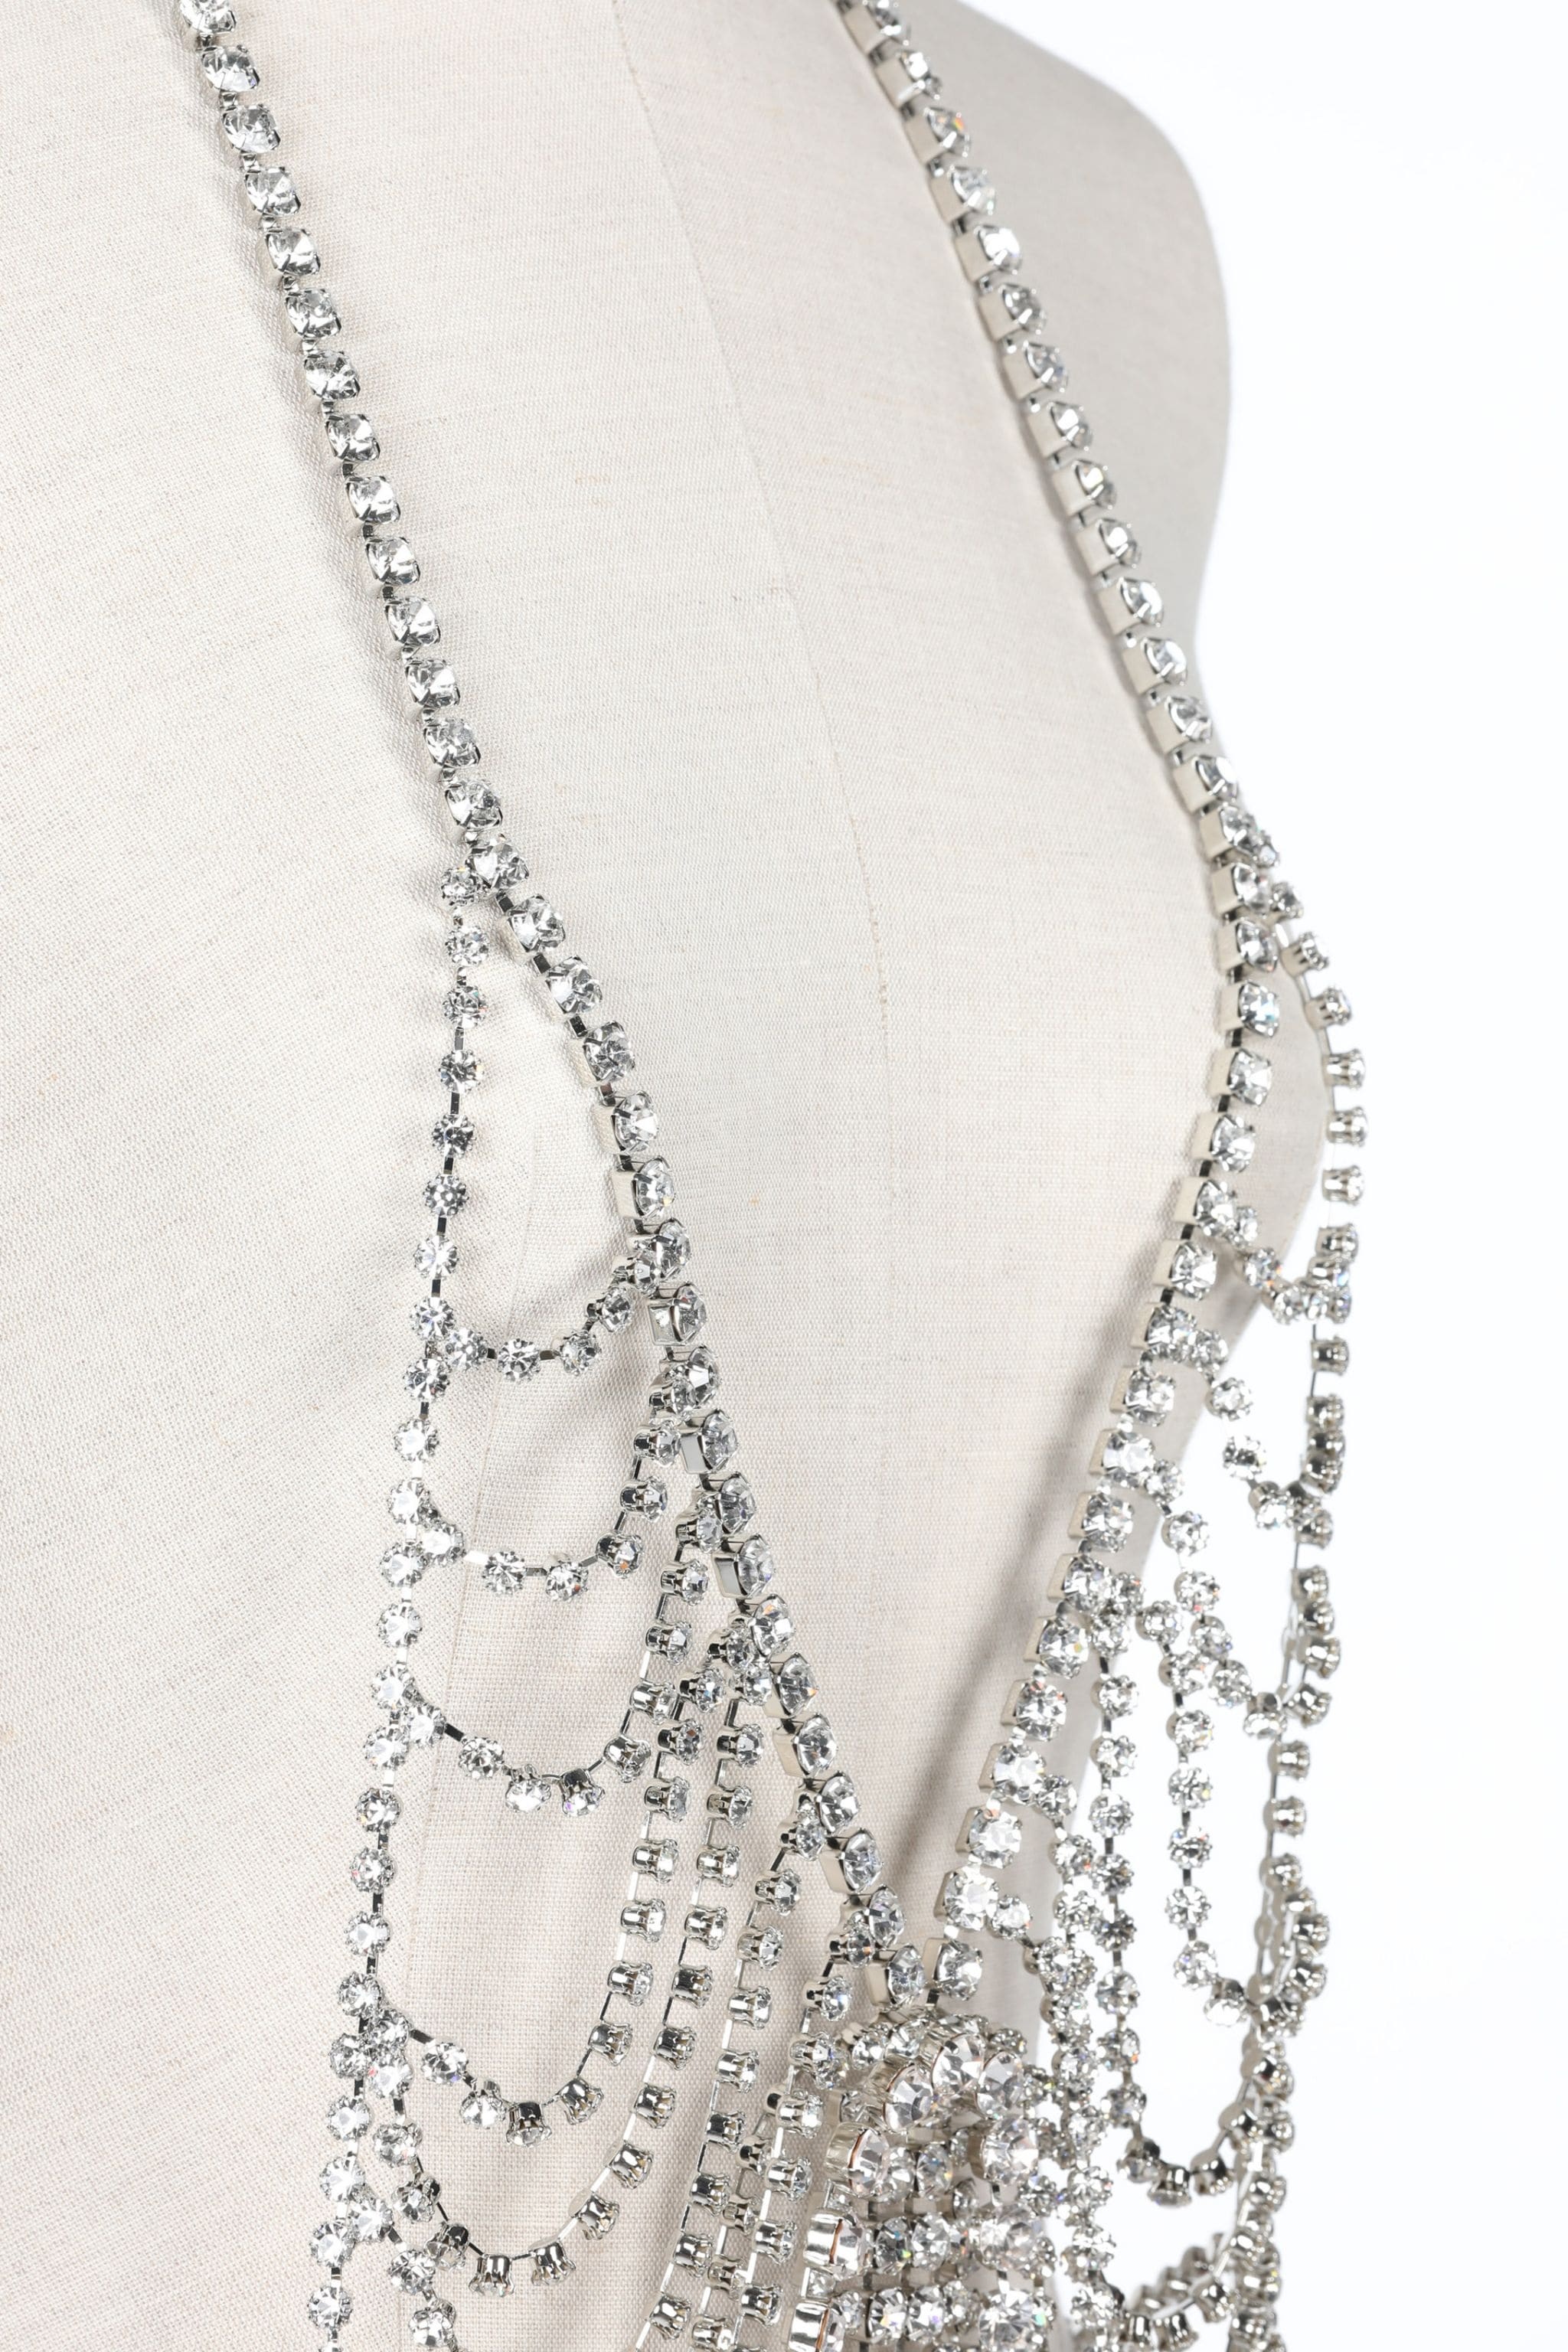 CRYSTAL-EMBELLISHED BODY CHAIN - 3